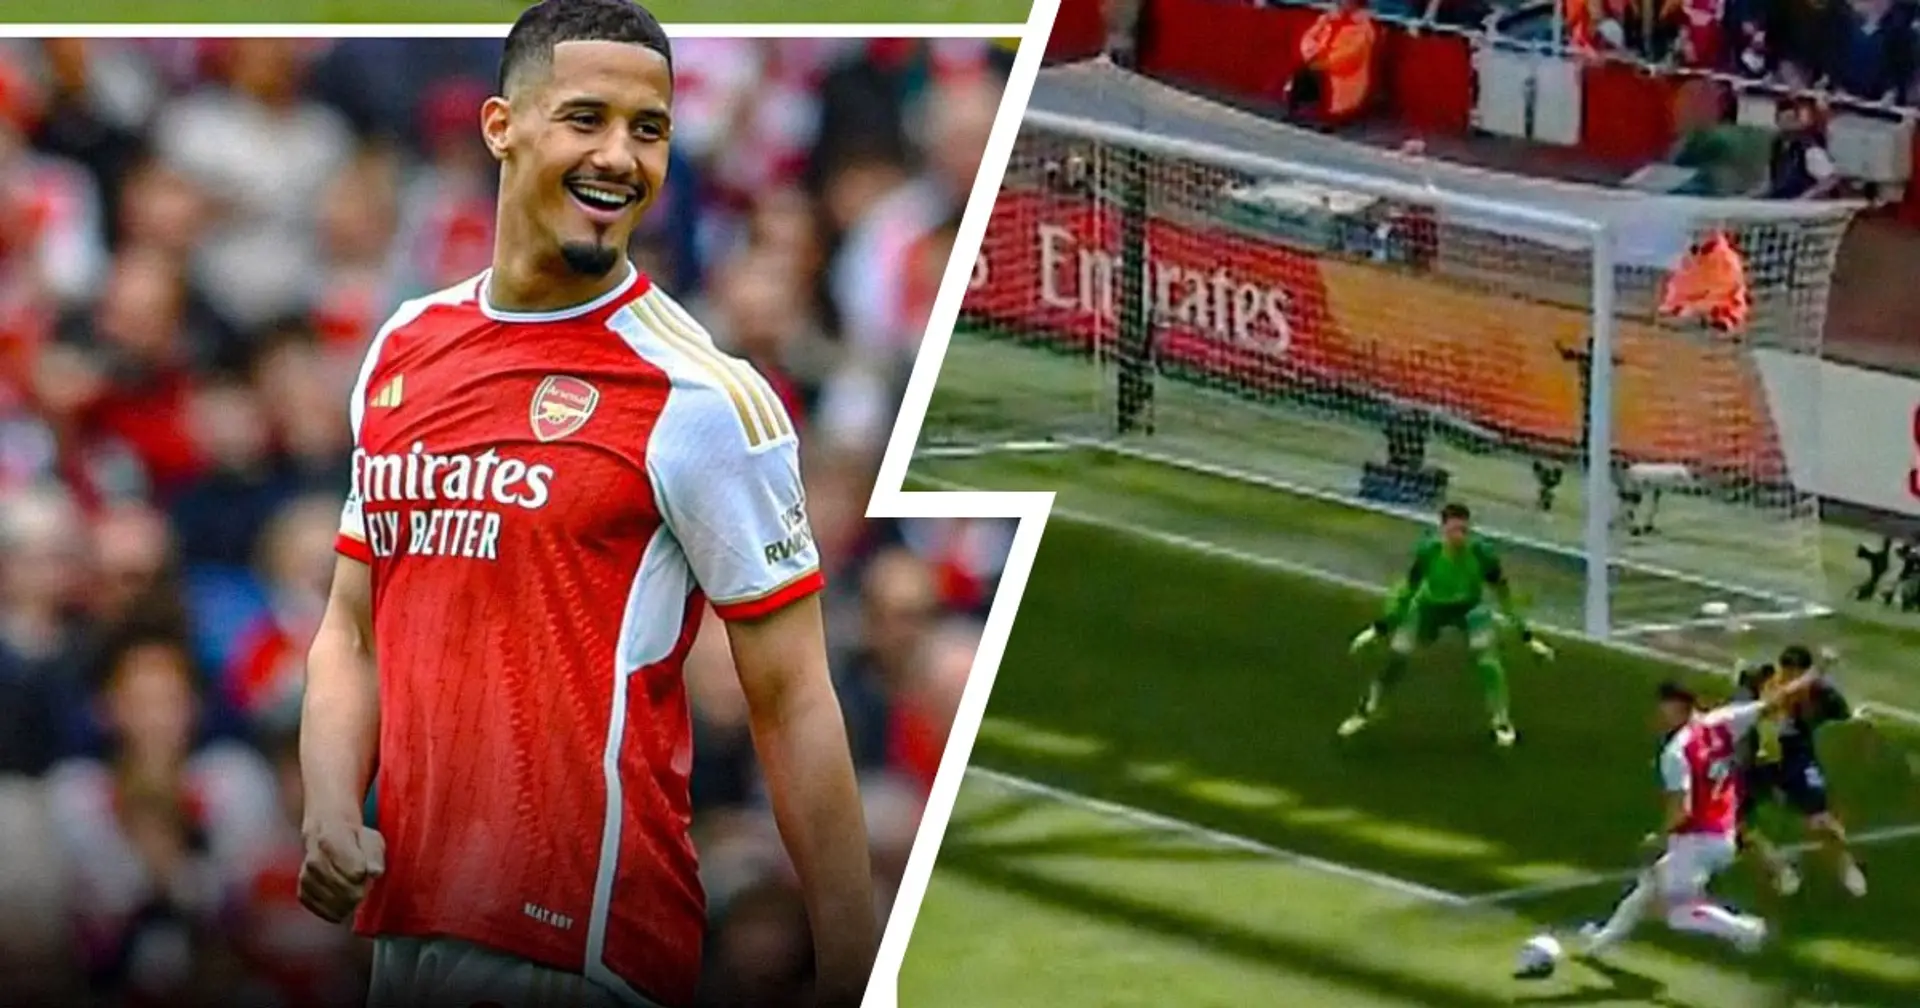 William Saliba shows class in 1 minute v Bournemouth - spotted